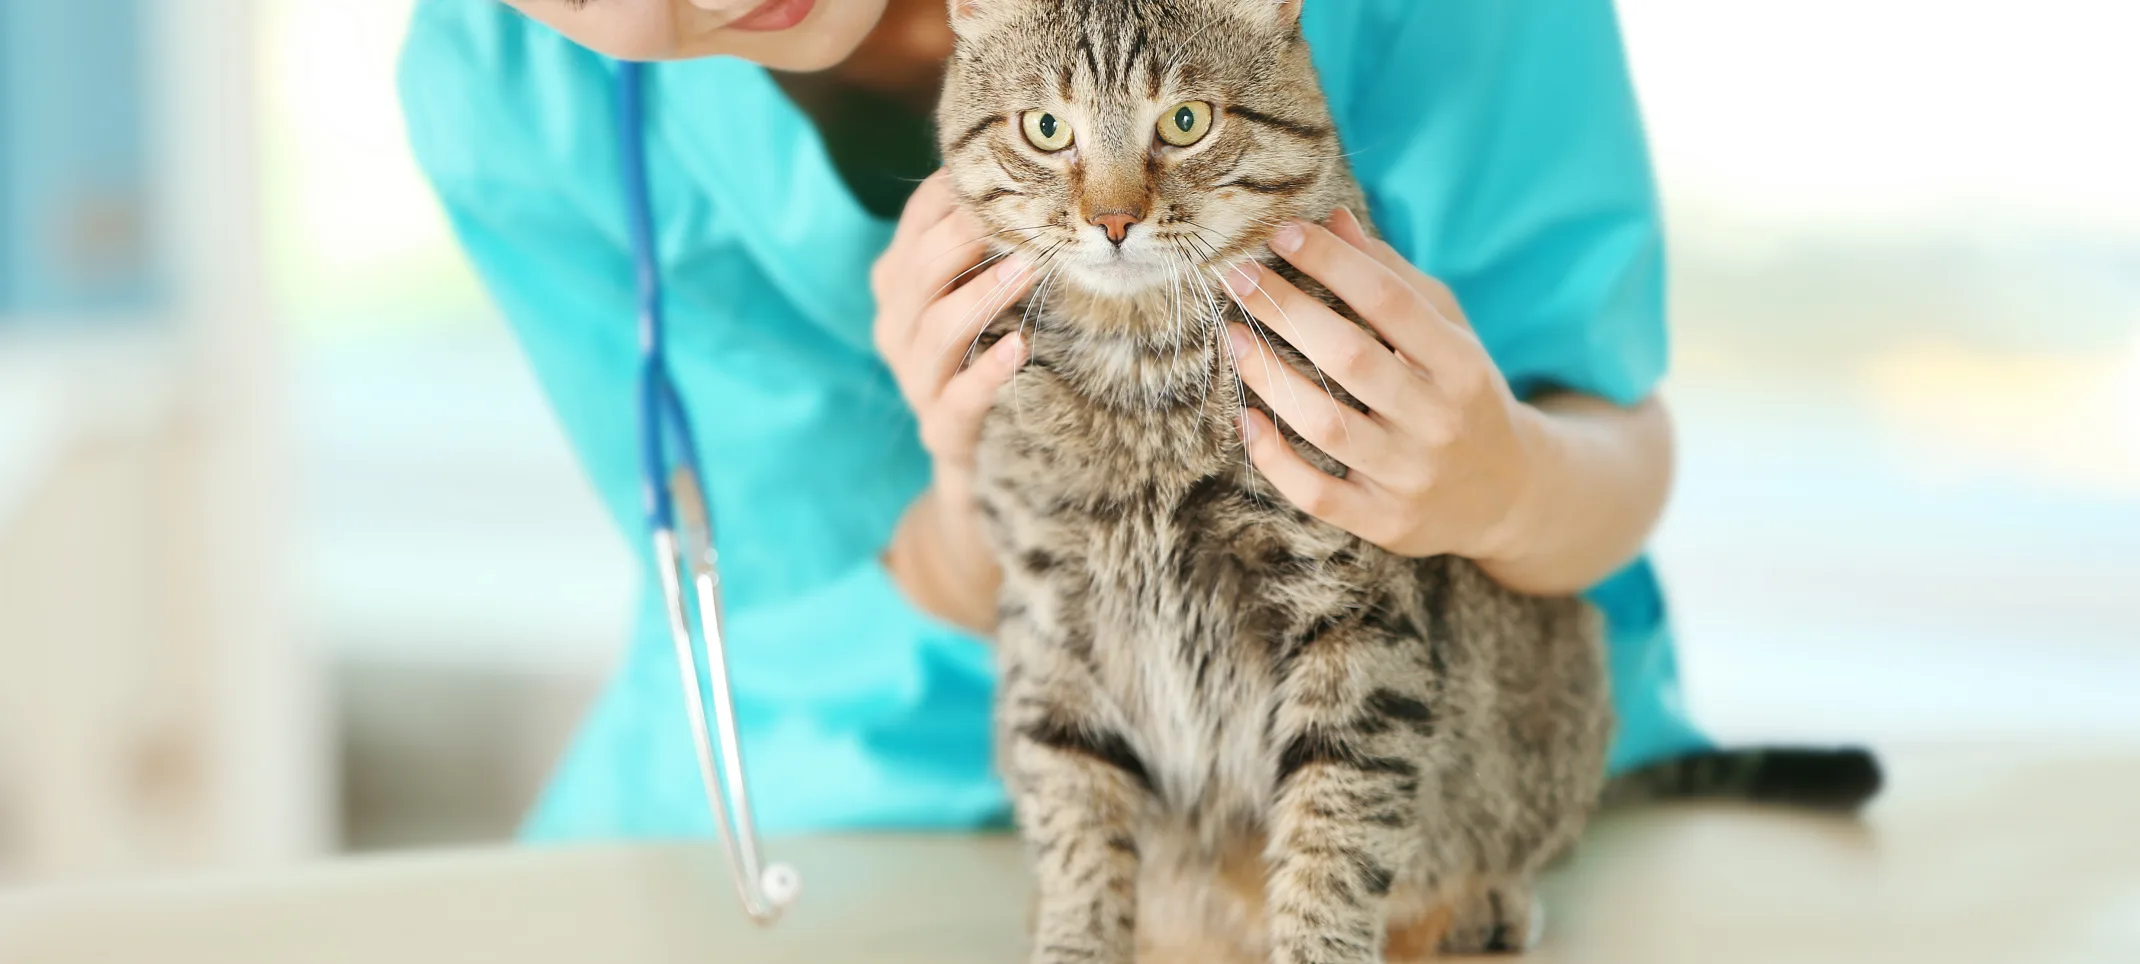 Female Veterinarian checking on cat's health status that she has on her table. 